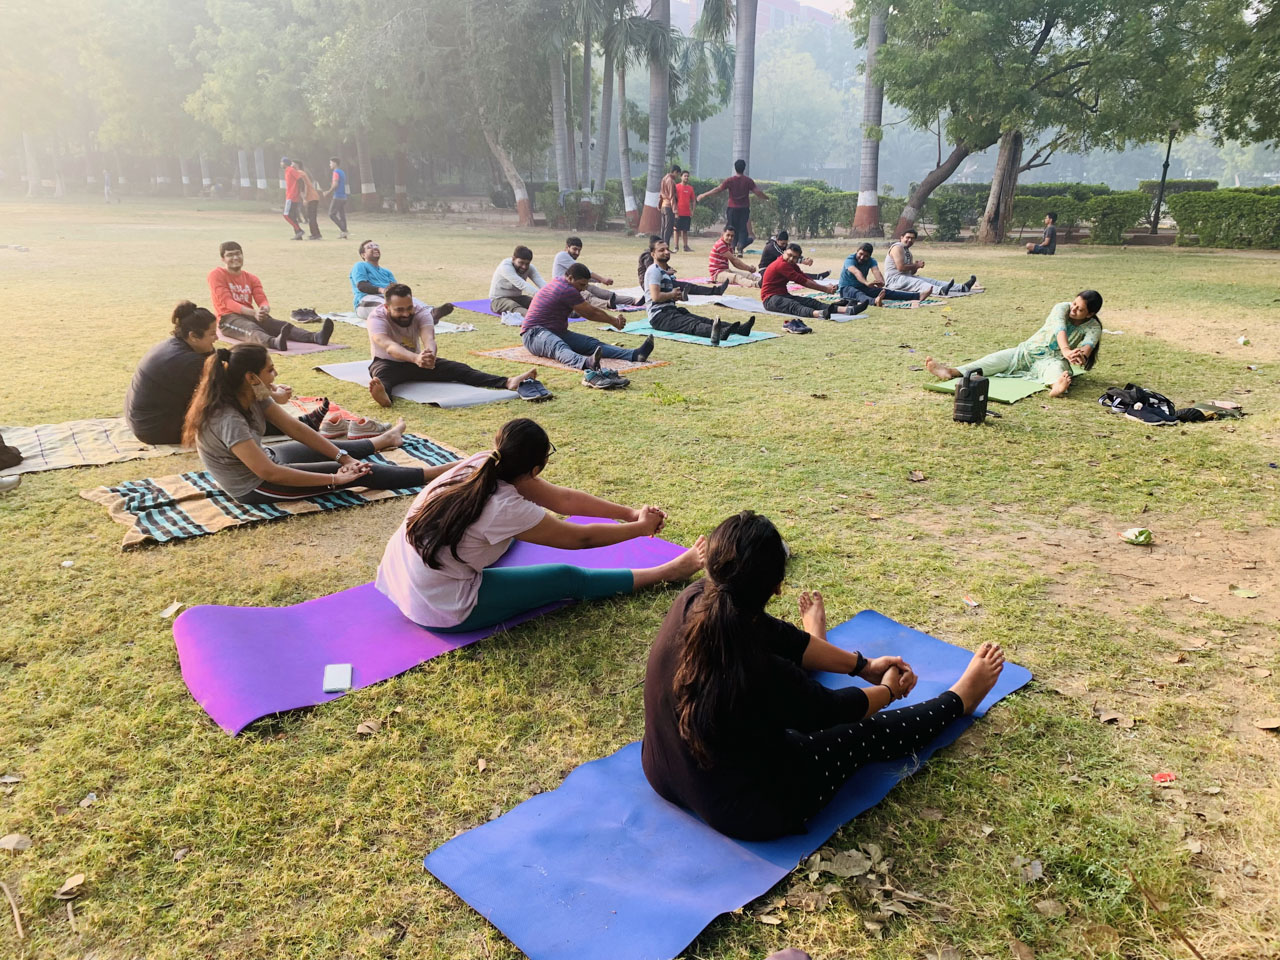 Group yoga in the park